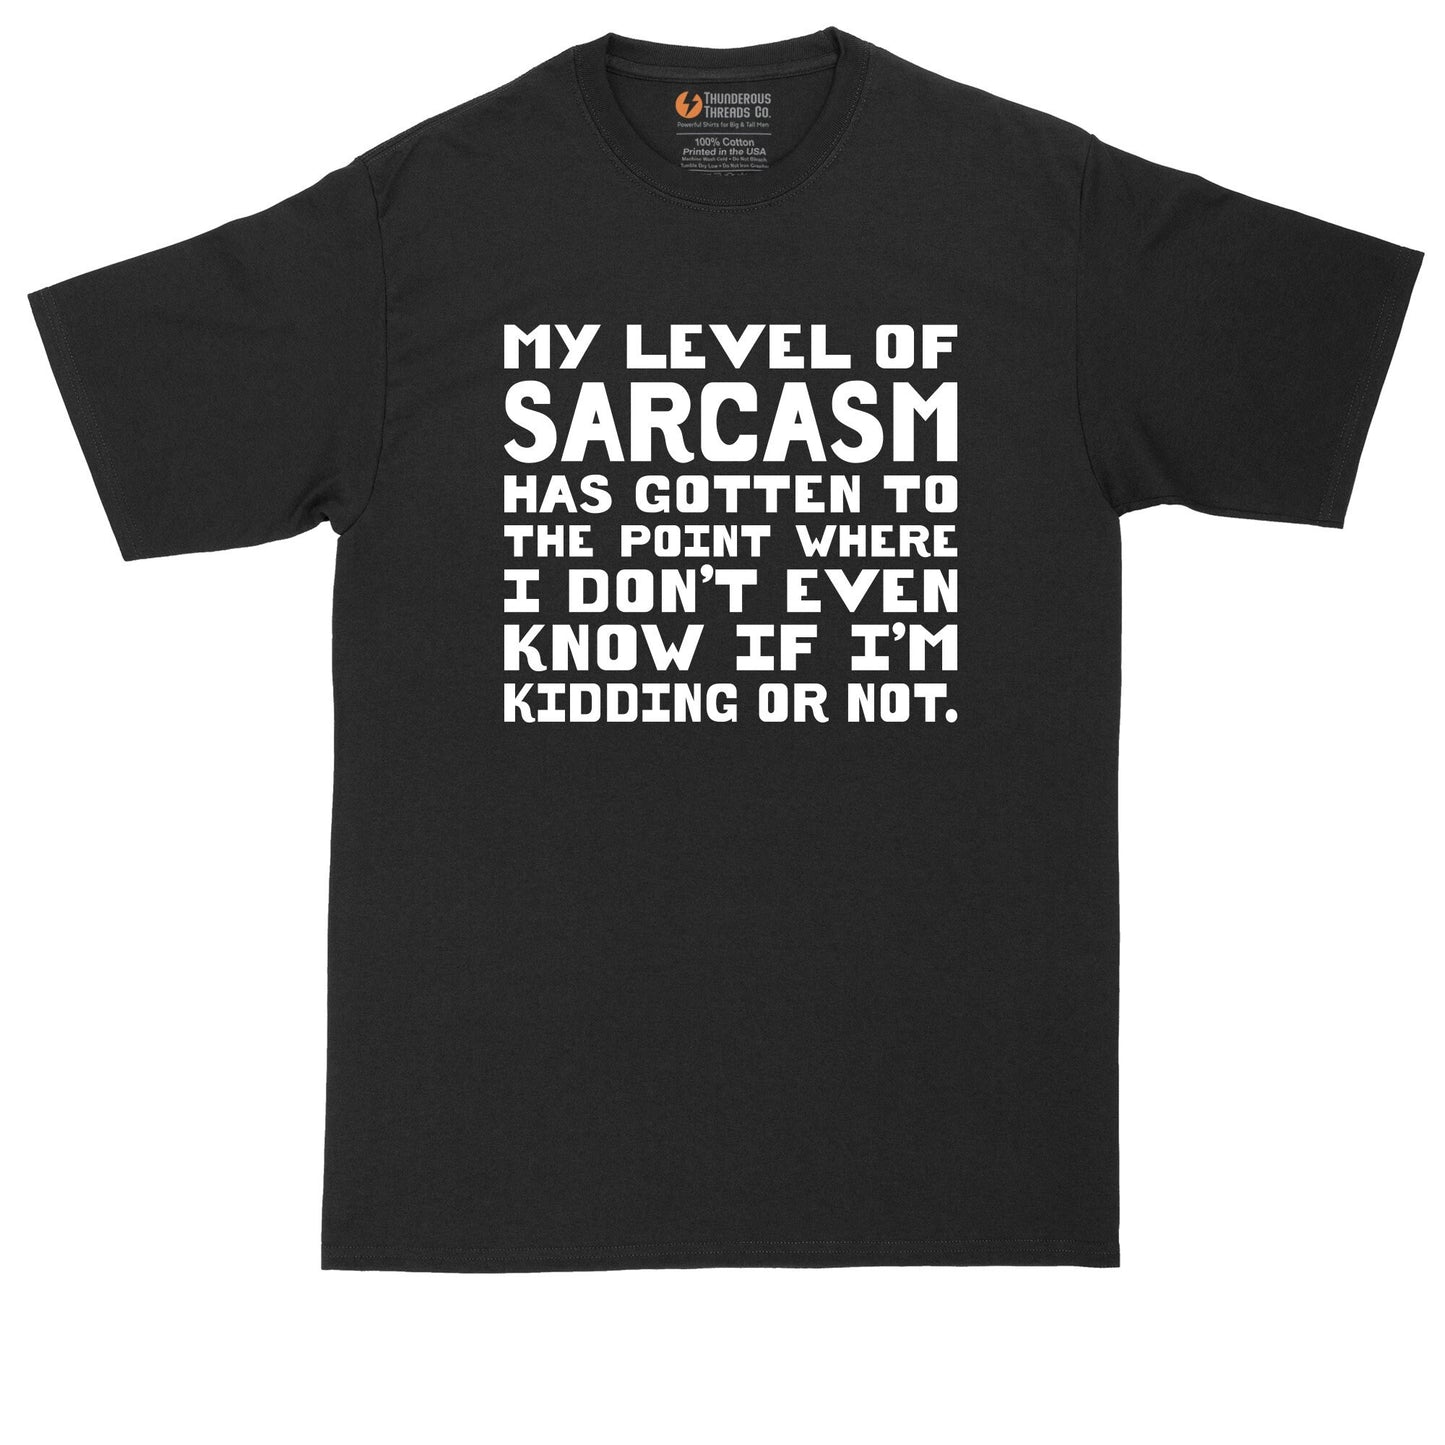 My Level of Sarcasm | Mens Big and Tall Shirts | Funny T-Shirt | Graphic T-Shirt